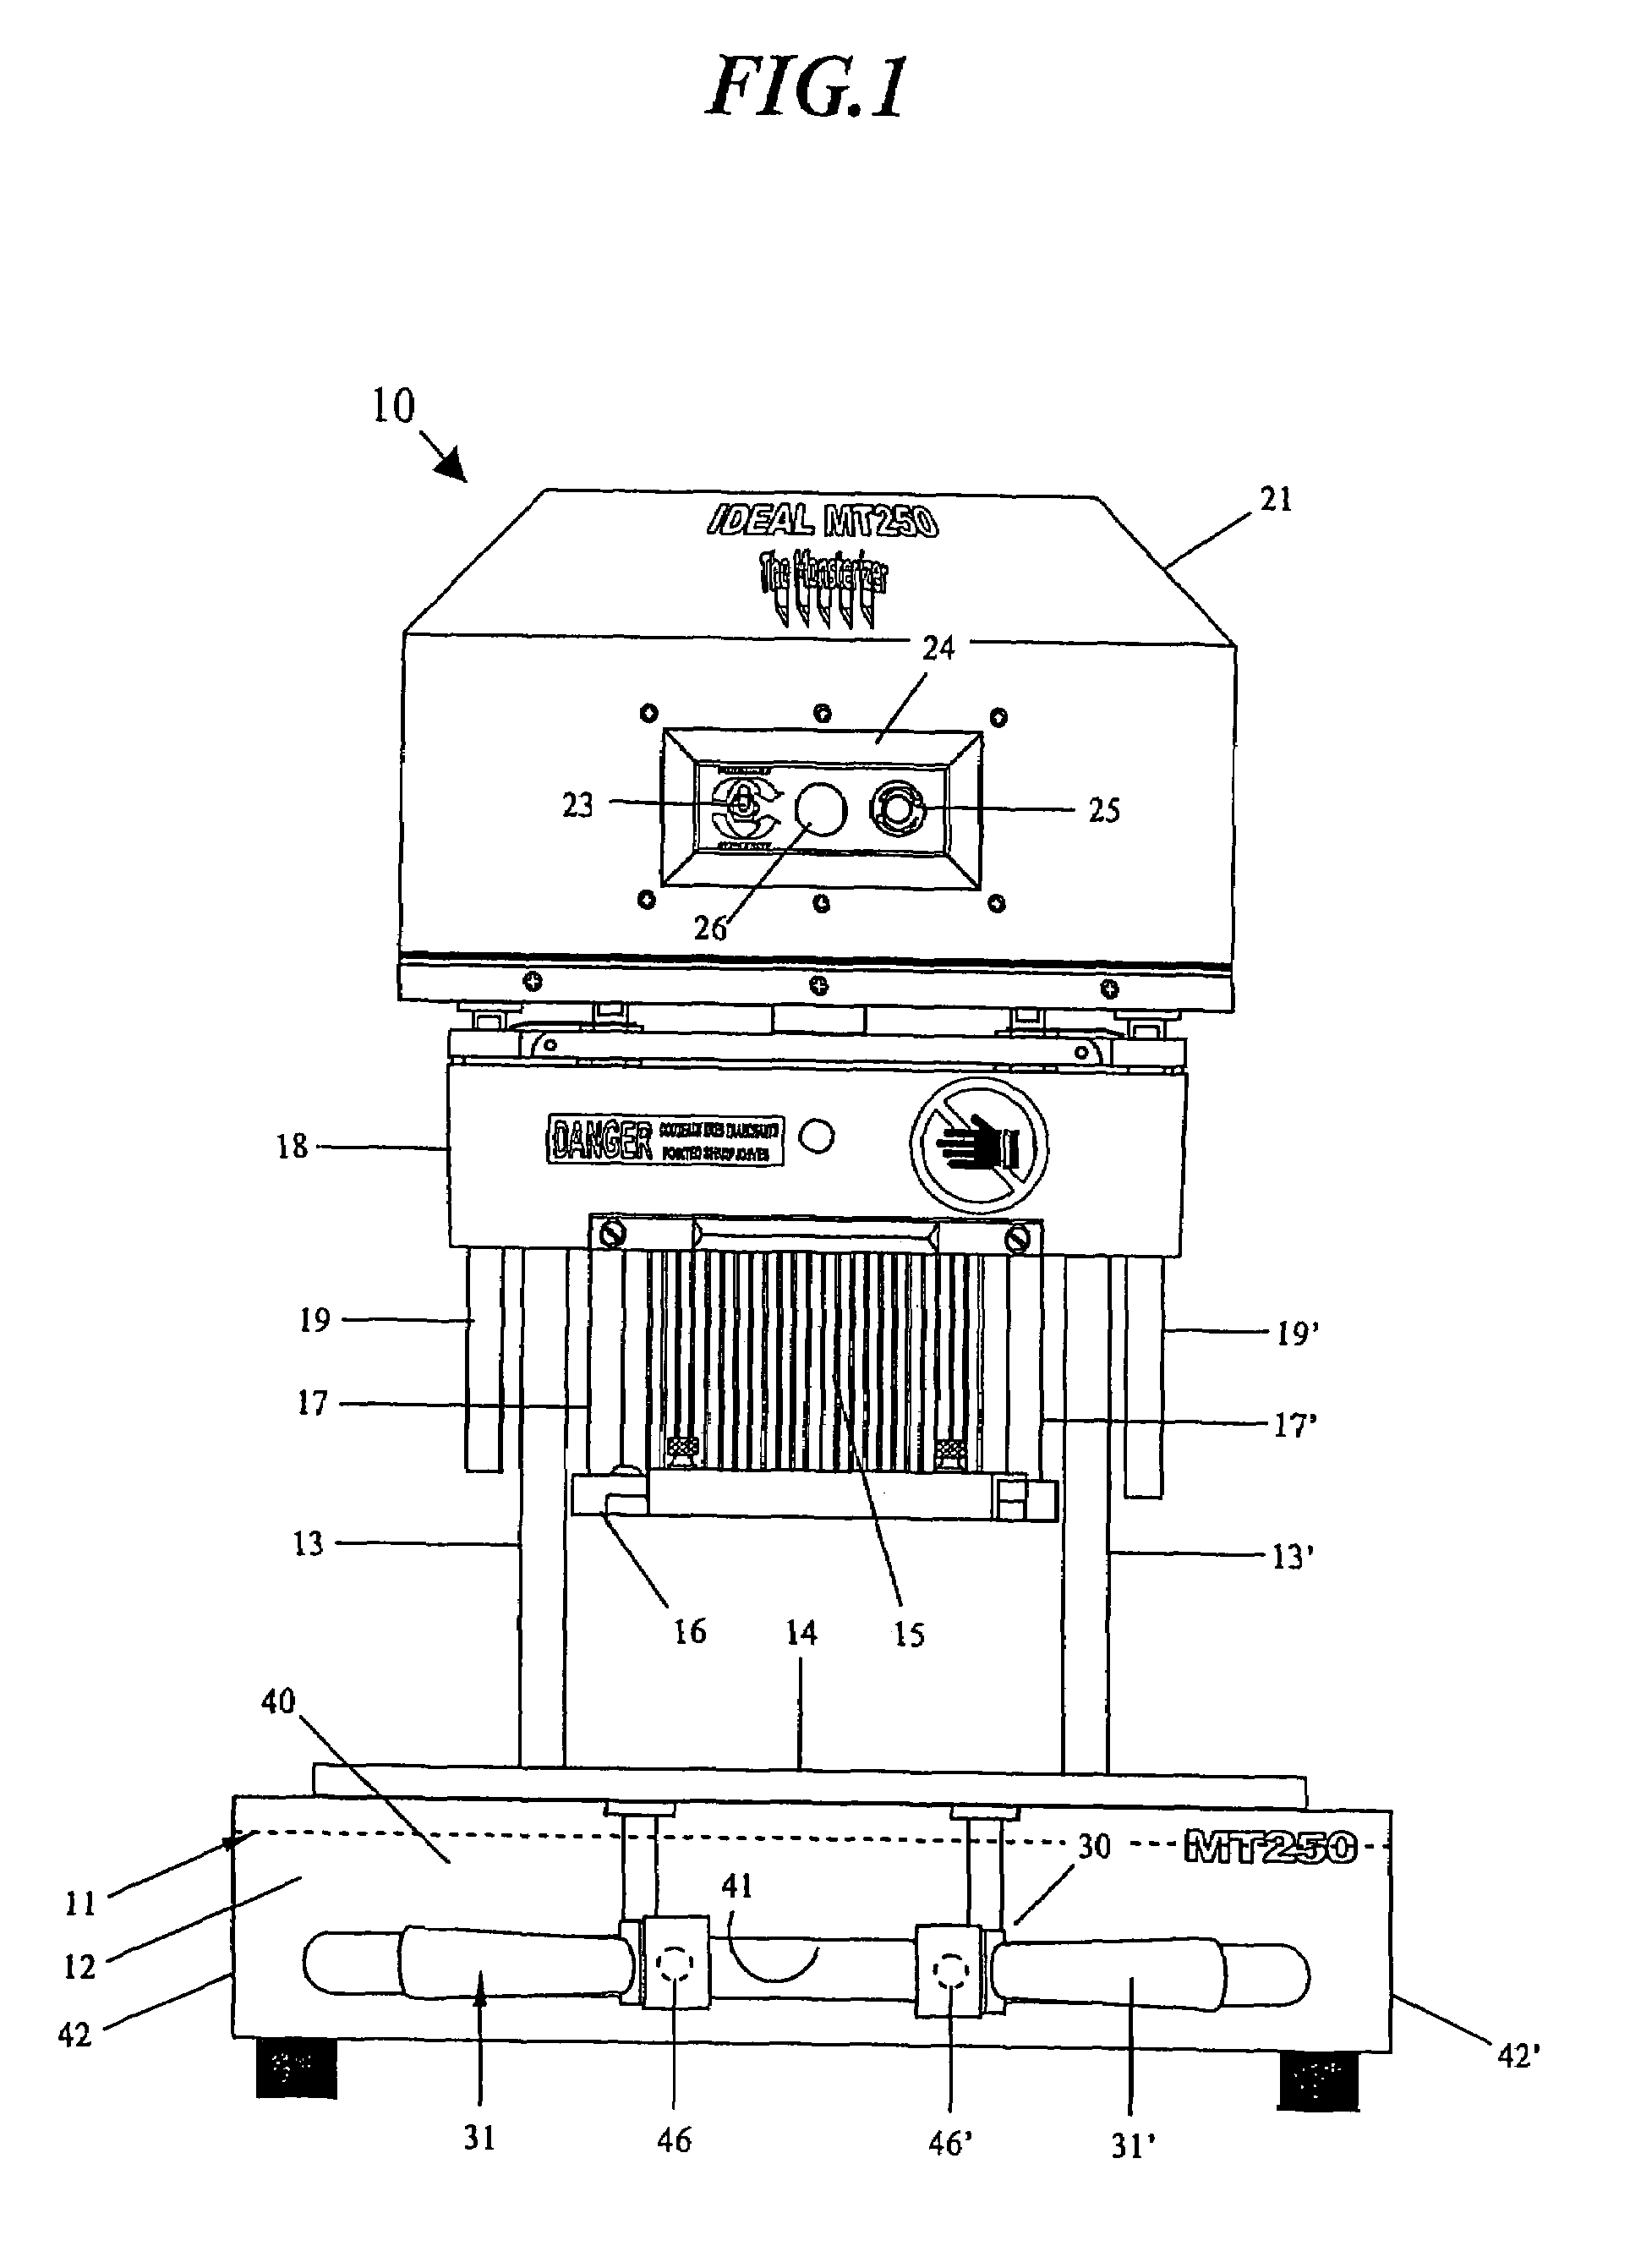 Meat tenderizing machine and method of use